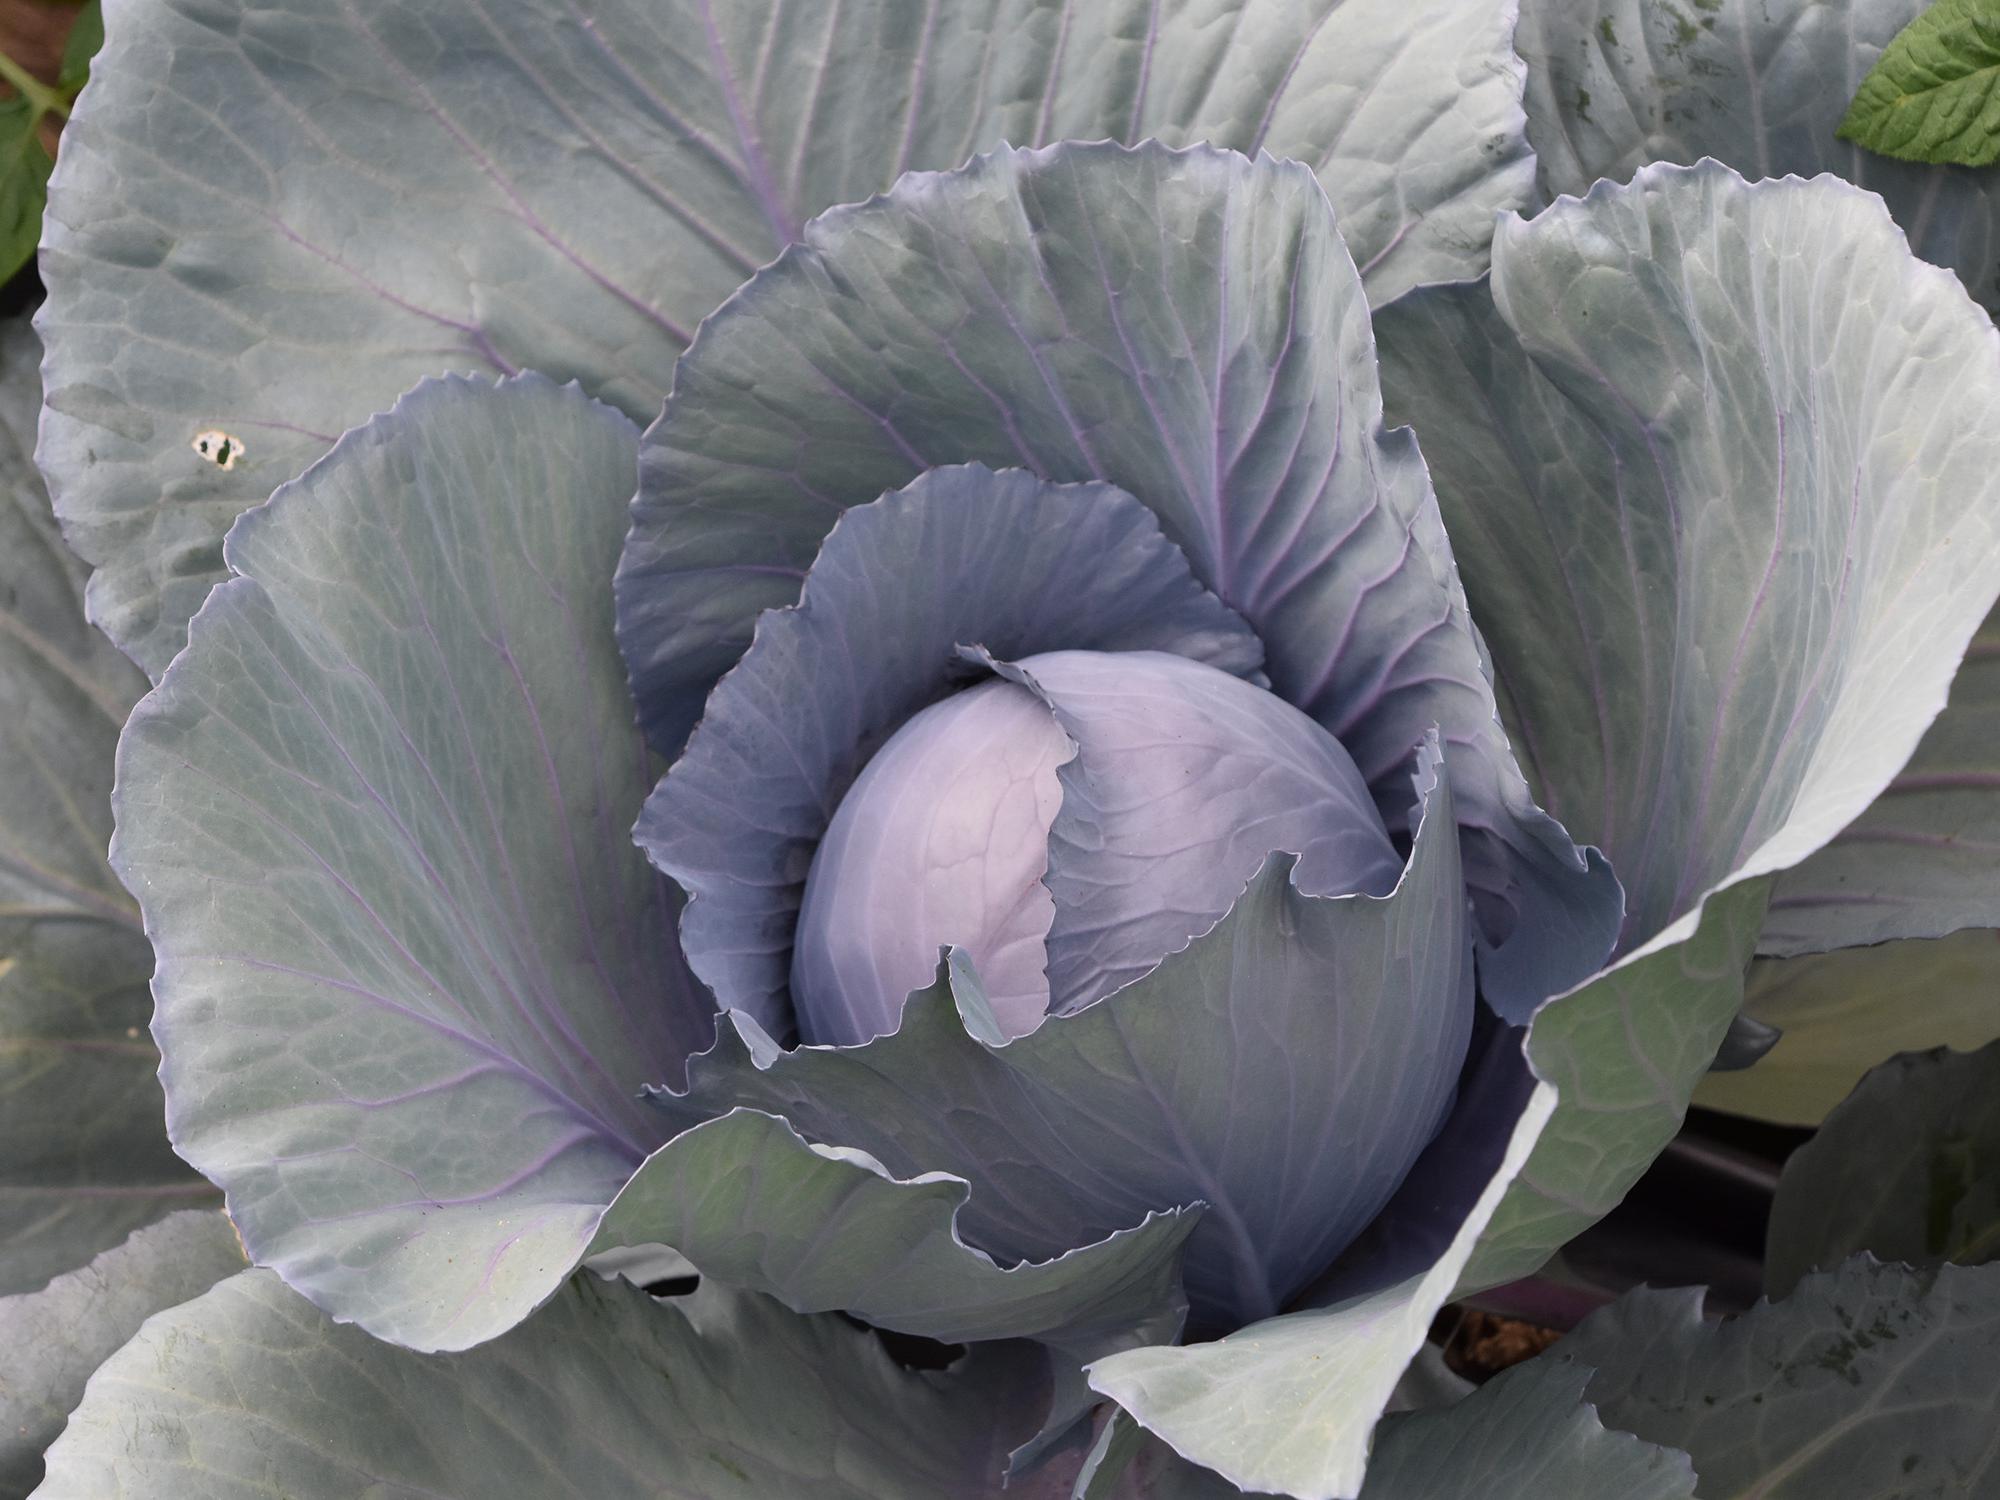 A head of cabbage grows in the center of a gorgeous red cabbage plant.